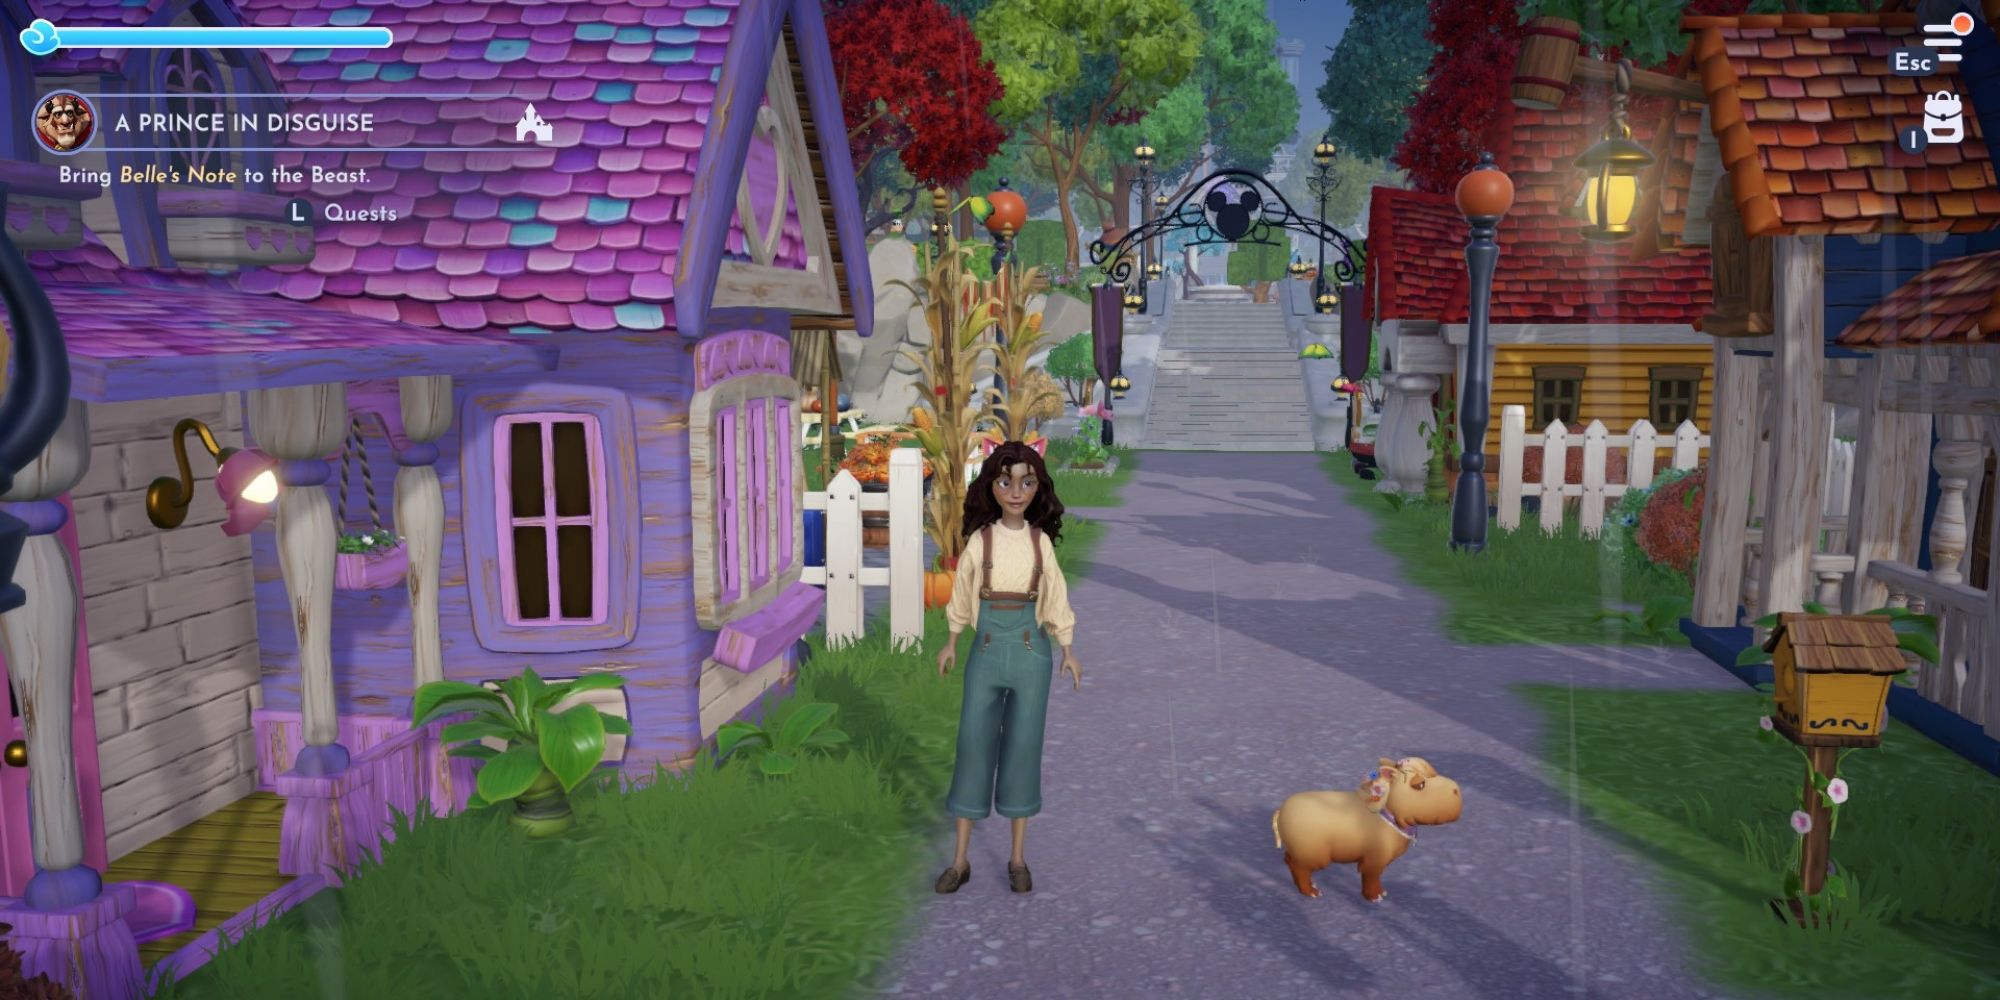 Disney Dreamlight Valley player next to minnie's house with capybara